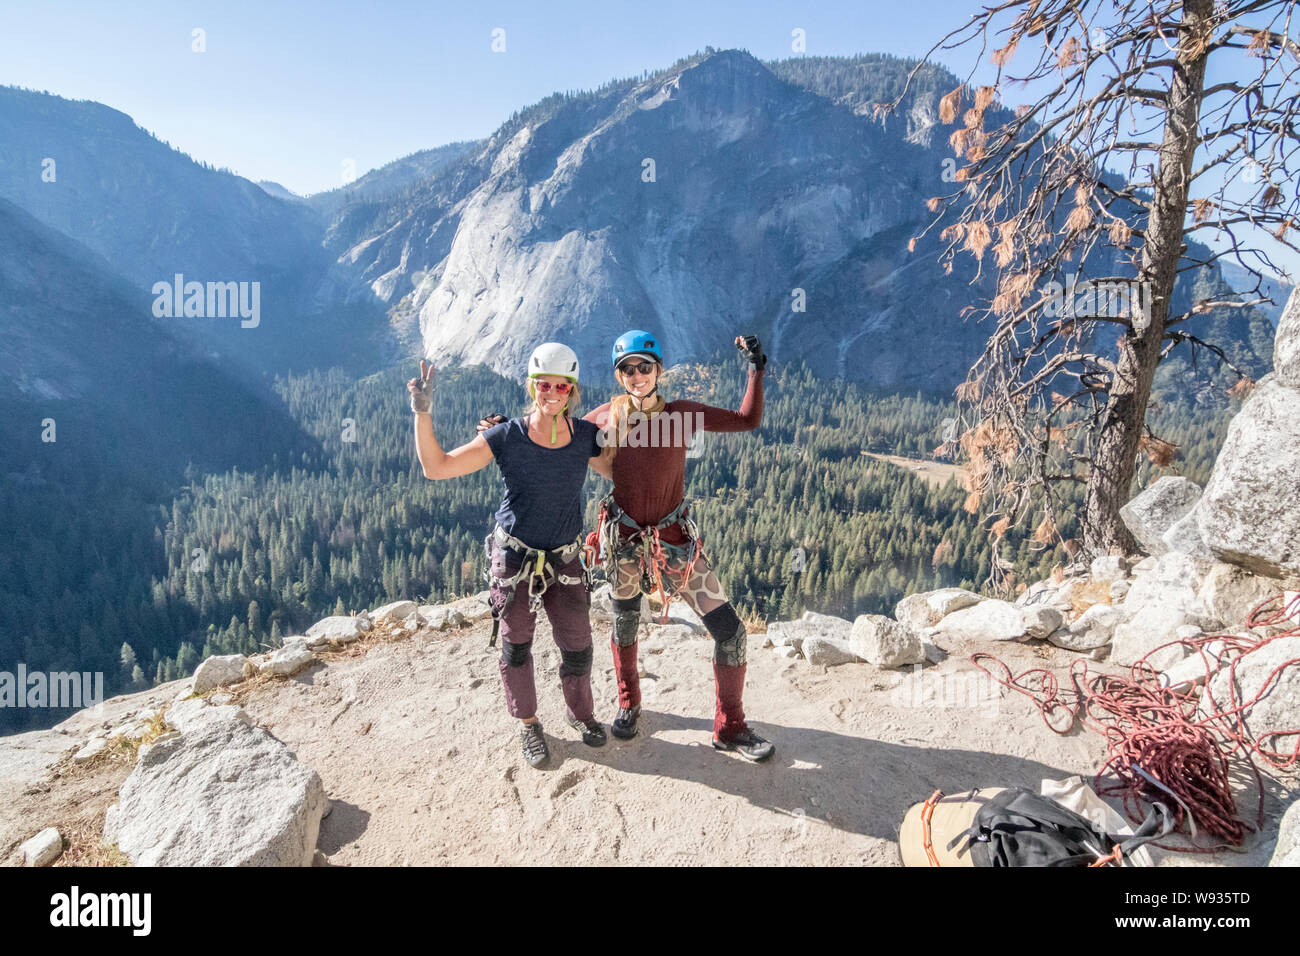 Two women pose victoriously after completing their climbing objective Stock Photo